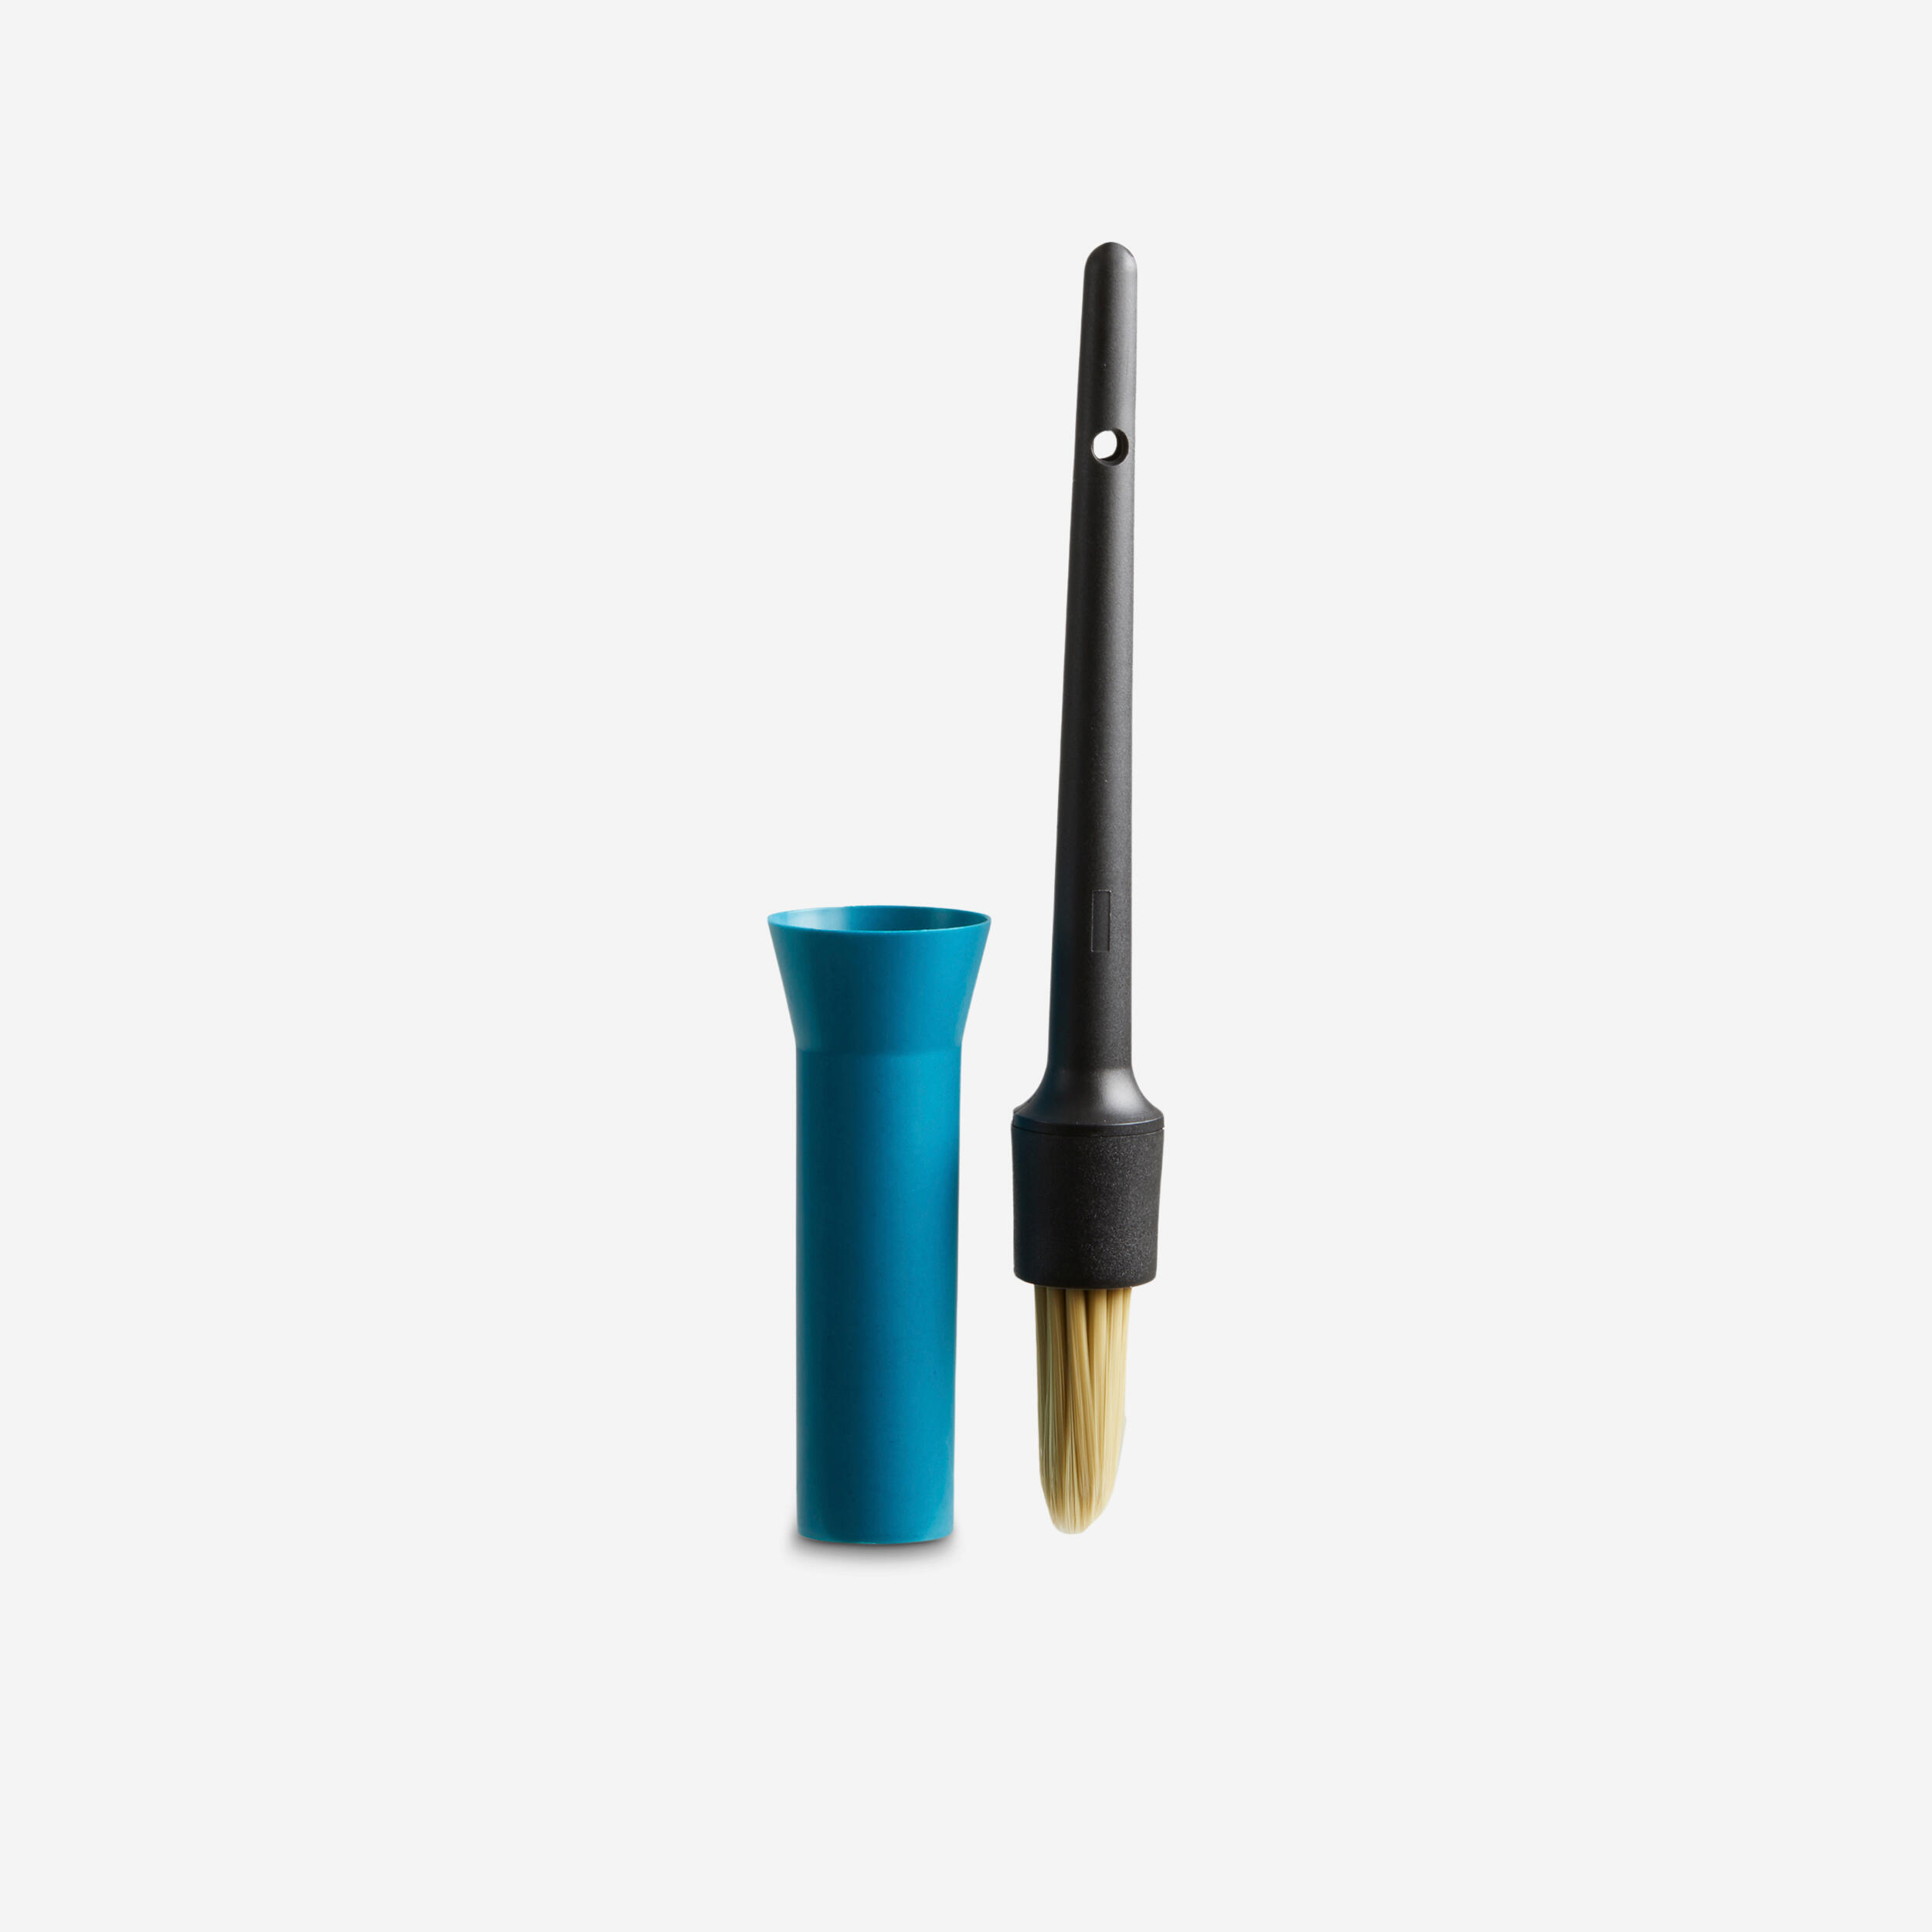 Capped Equestrian Brush - Turquoise Blue 1/3